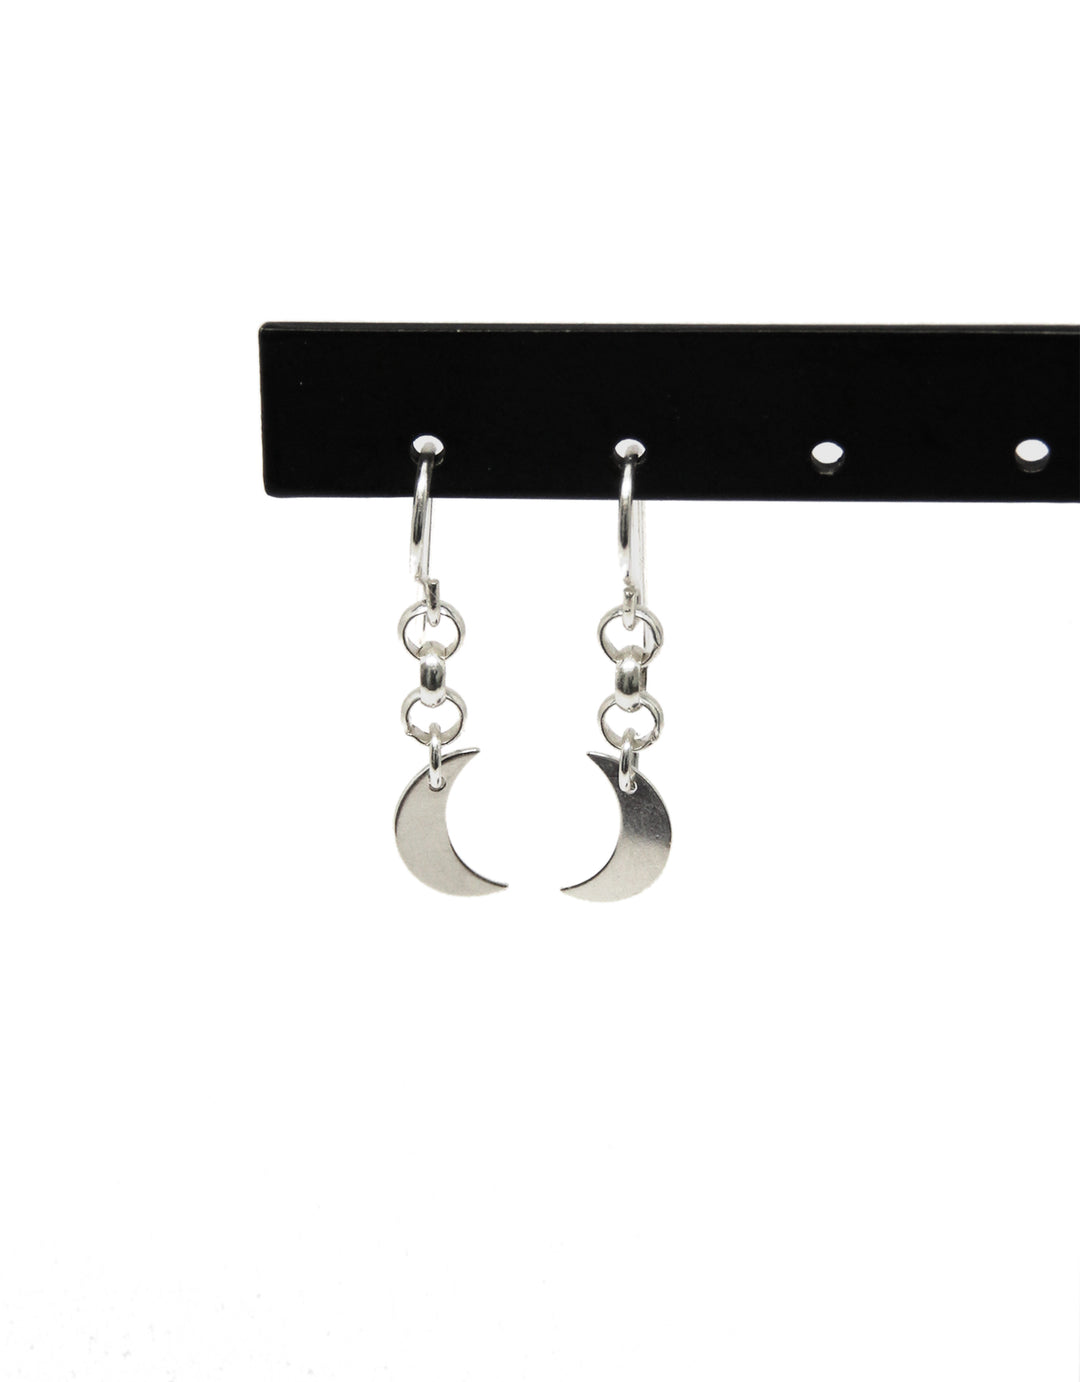 made in france boucles d'oreilles petites lunes et chaîne argent moon and chain silver hook earrings